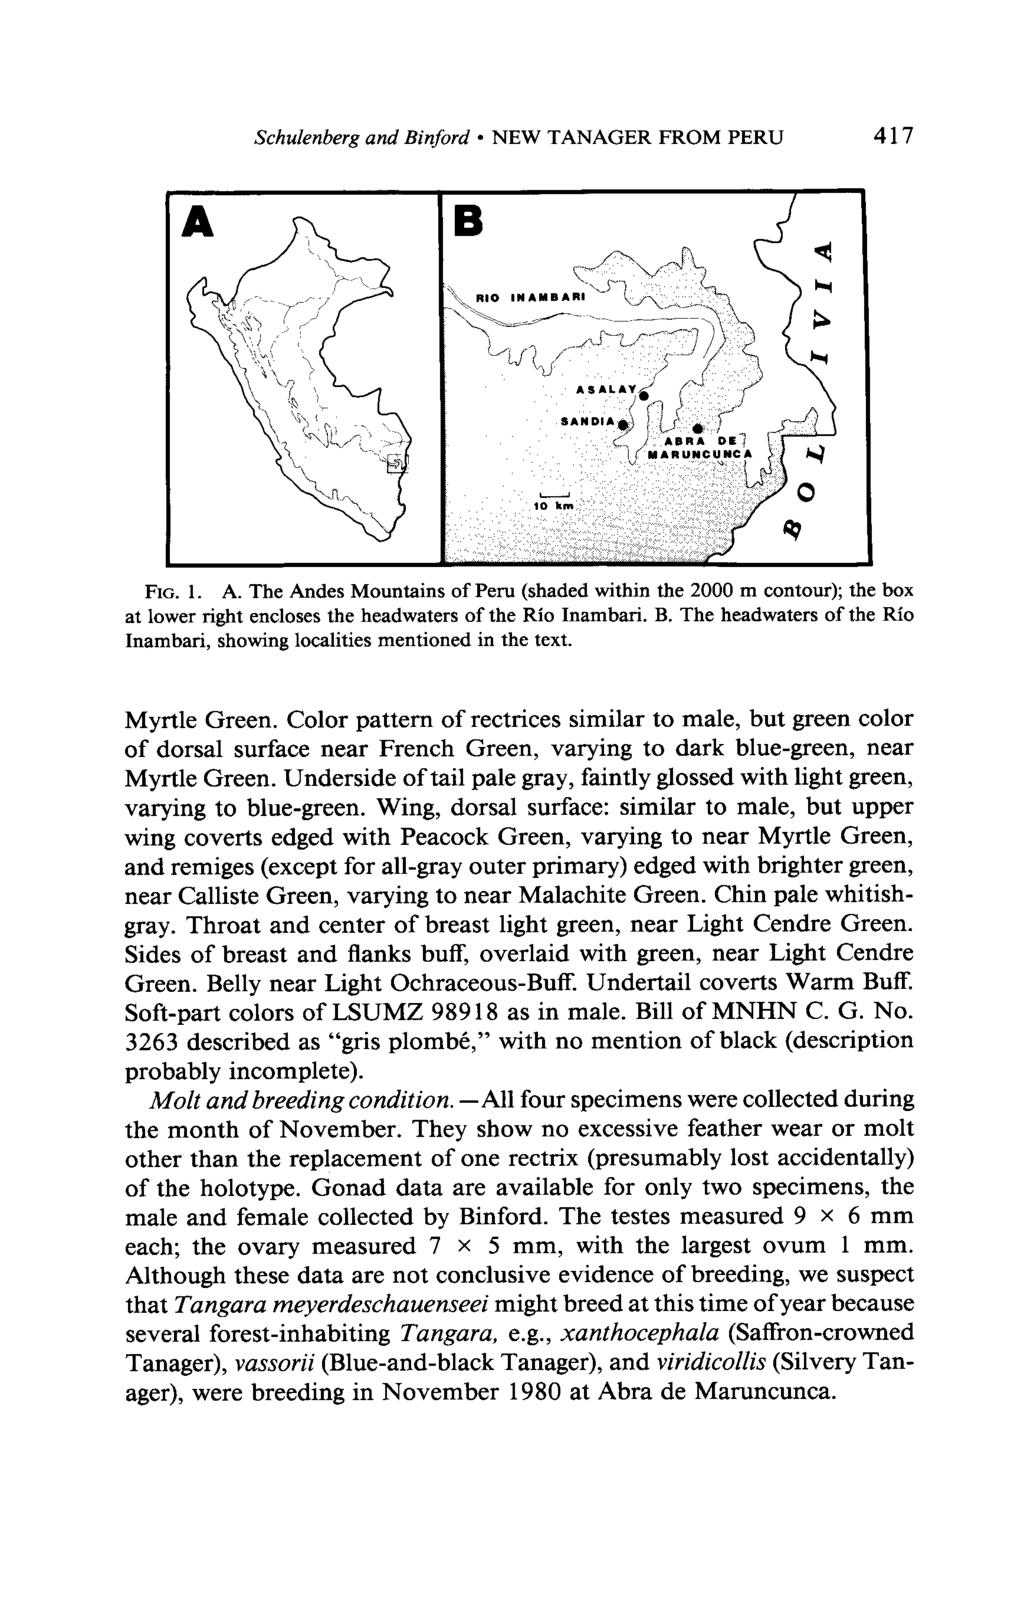 Schulenberg and Binford l NEW TANAGER FROM PERU 417 FIG. 1. A. The Andes Mountains of Peru (shaded within the 2000 m contour); the box at lower right encloses the headwaters of the Rio Inambari. B. The headwaters of the Rio Inambari, showing localities mentioned in the text.